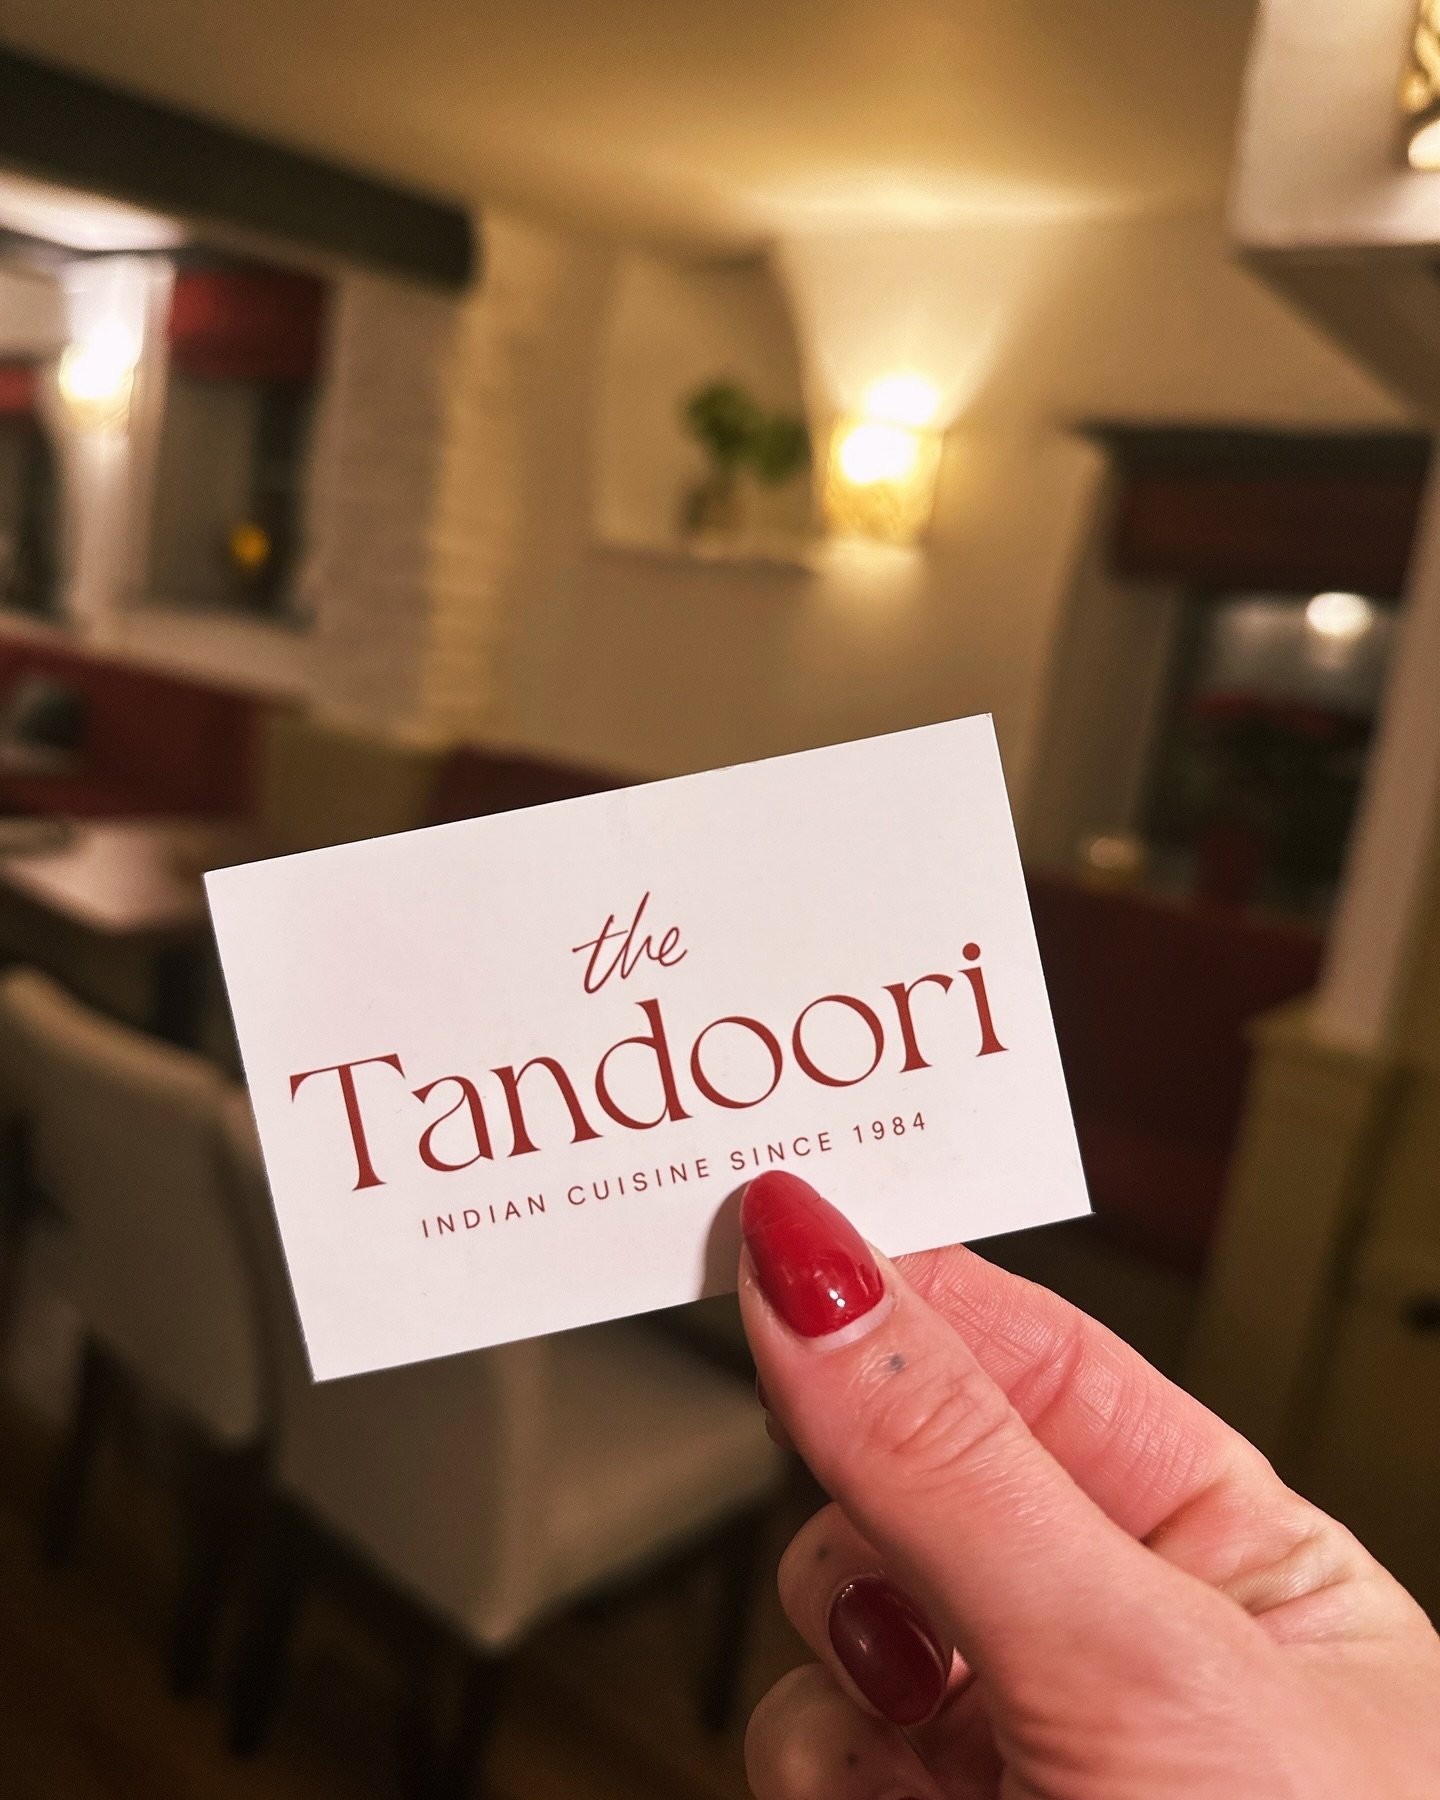 Book a table or order online at www.thetandoori-melksham.co.uk or call 01225705242 📞
We look forward to seeing you! 🍽️🥘